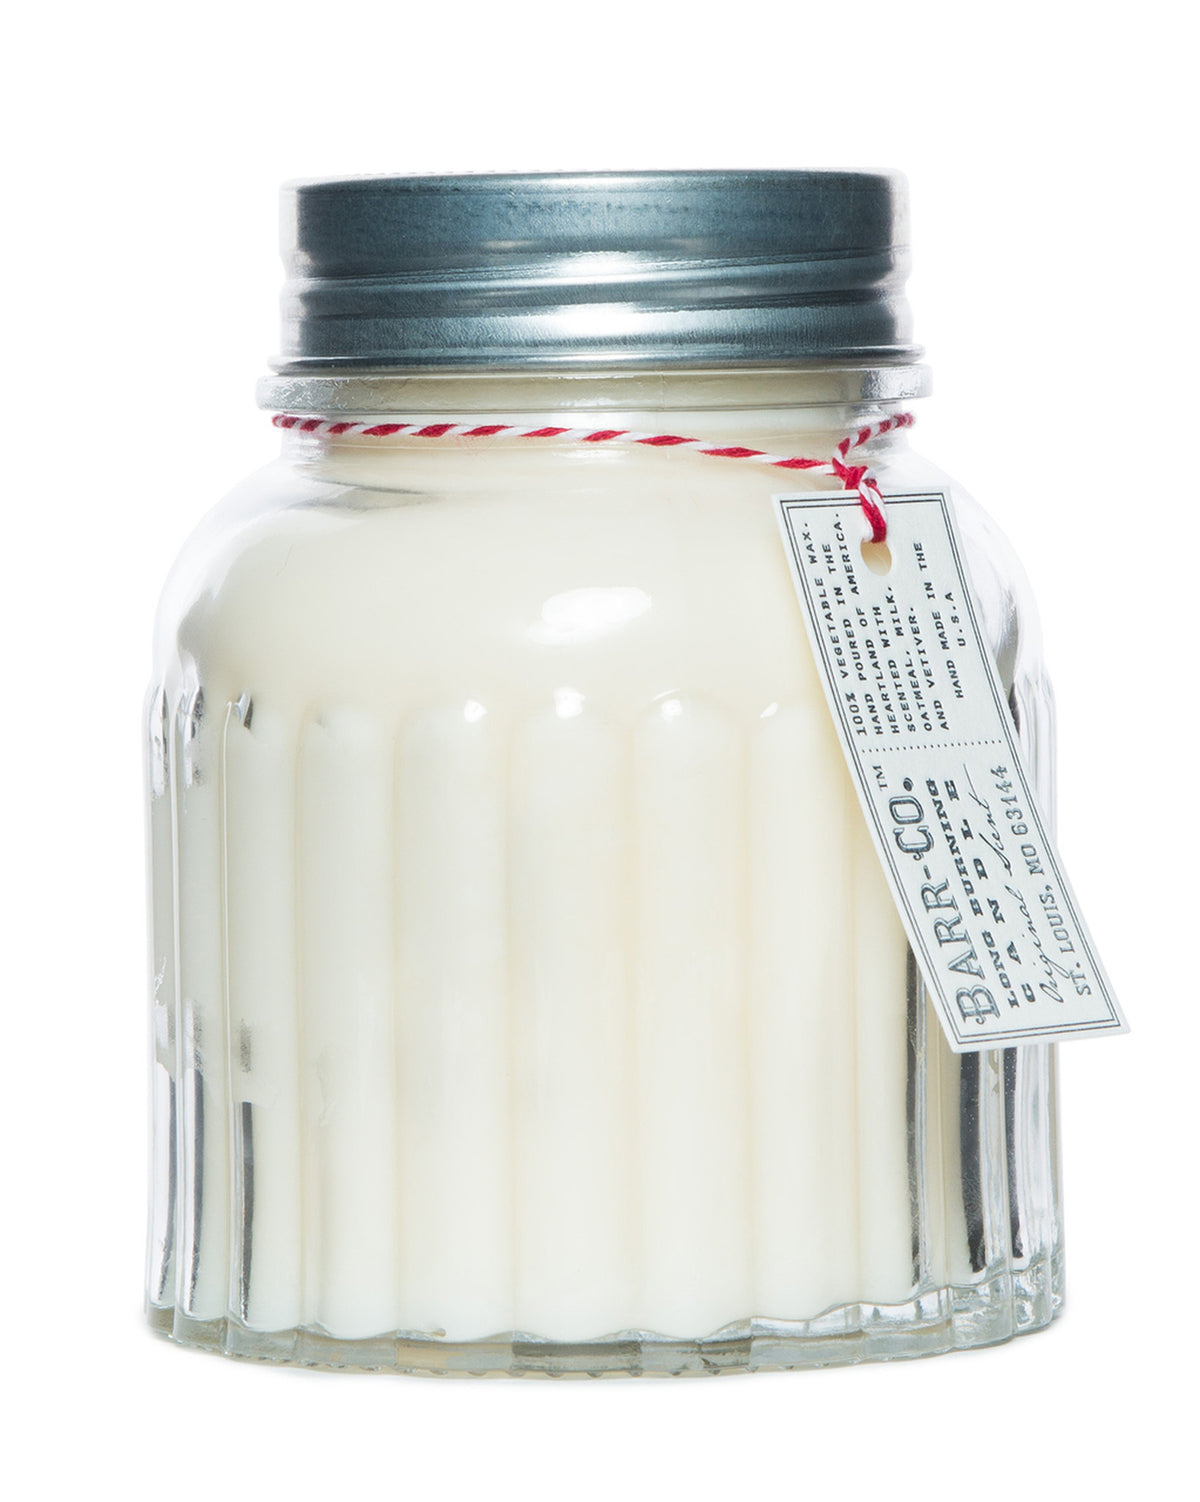 Barr-Co. Original Scent Apothecary Jar Candle